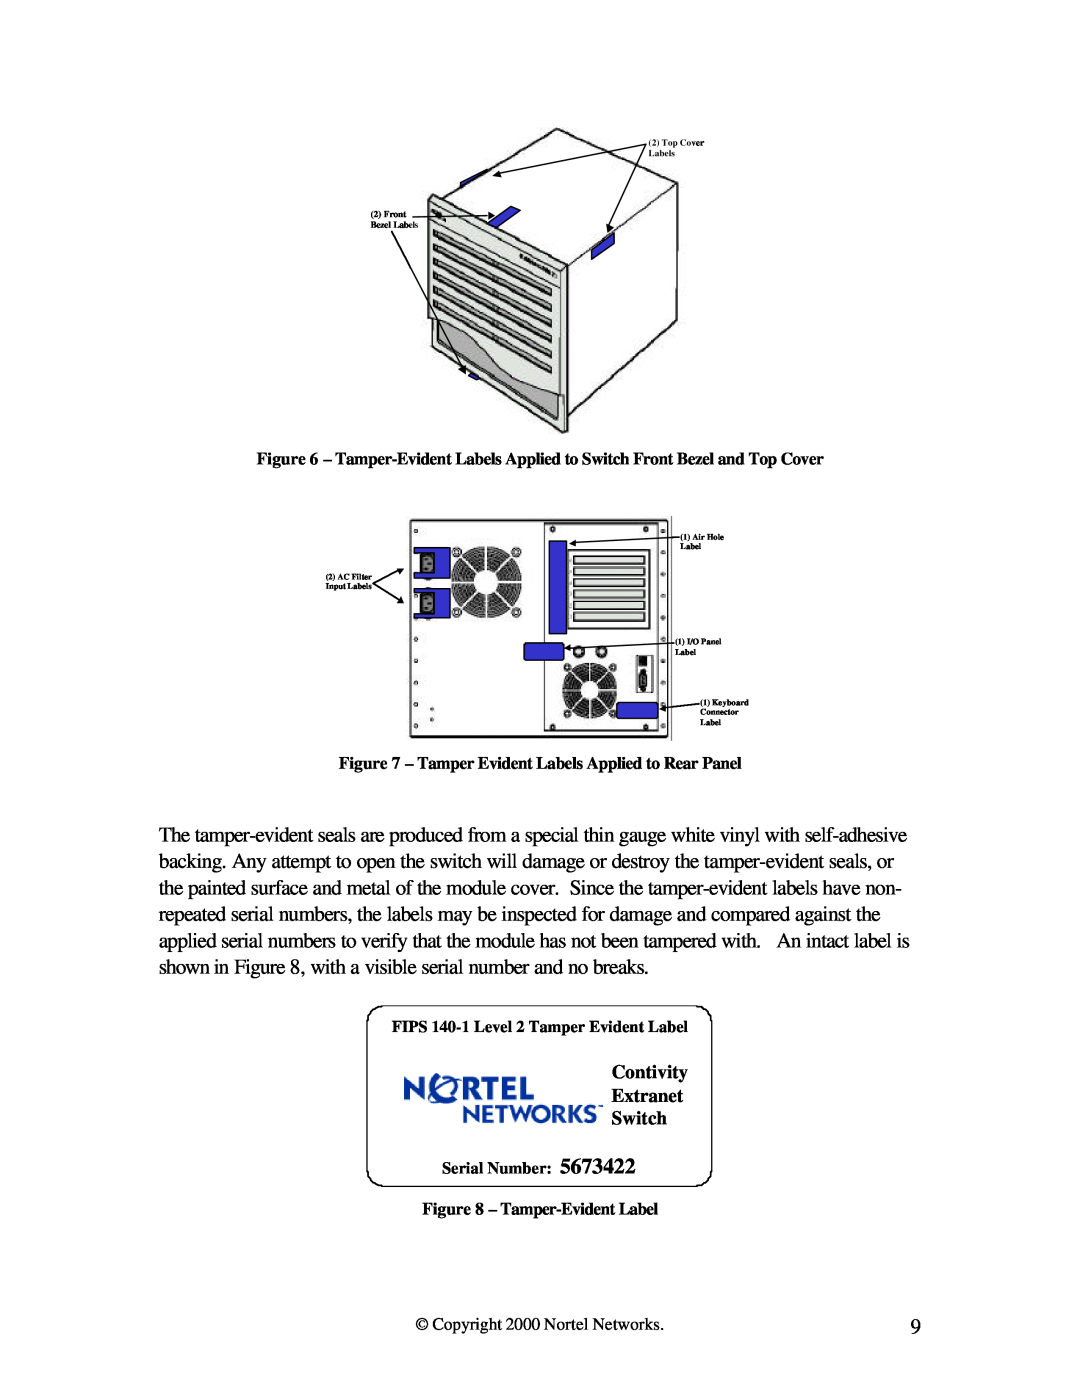 Nortel Networks 4500 FIPS Contivity Extranet Switch, Tamper Evident Labels Applied to Rear Panel, Tamper-Evident Label 